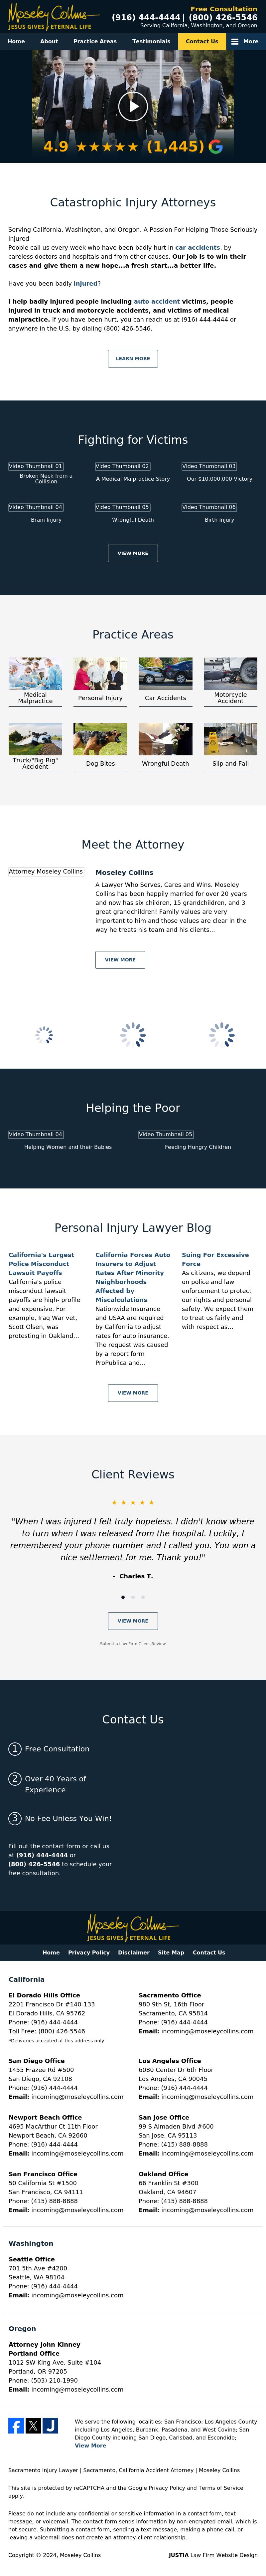 Moseley Collins - Roseville CA Lawyers